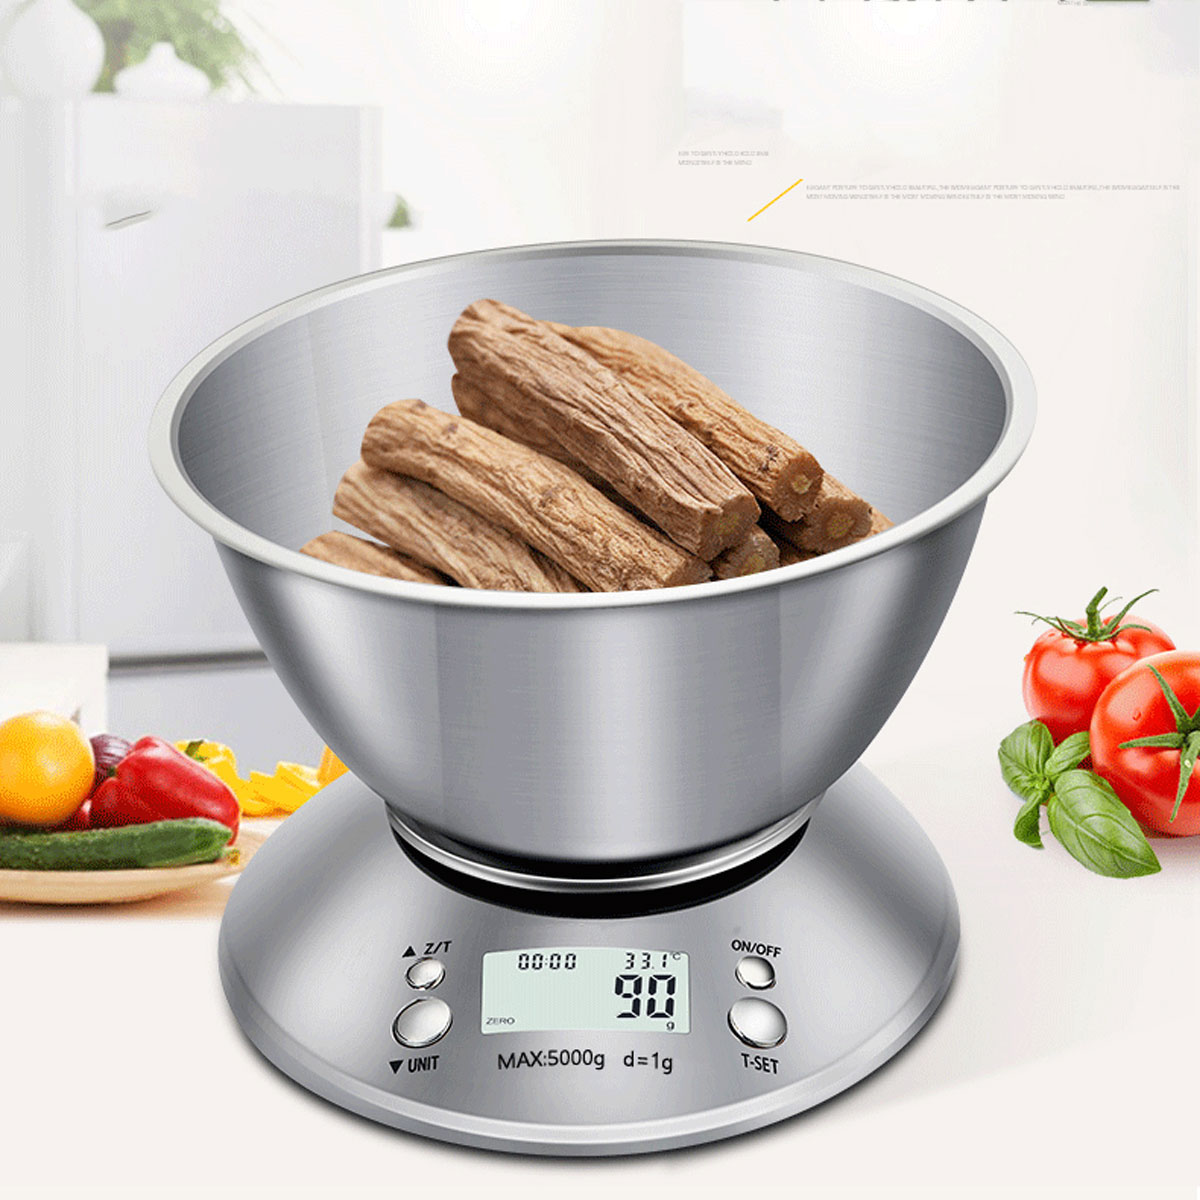 Digital-Kitchen-Scale-LCD-Display-Stainless-Steel-Baking-High-Precision-Removable-Kitchen-Scale-1859940-9